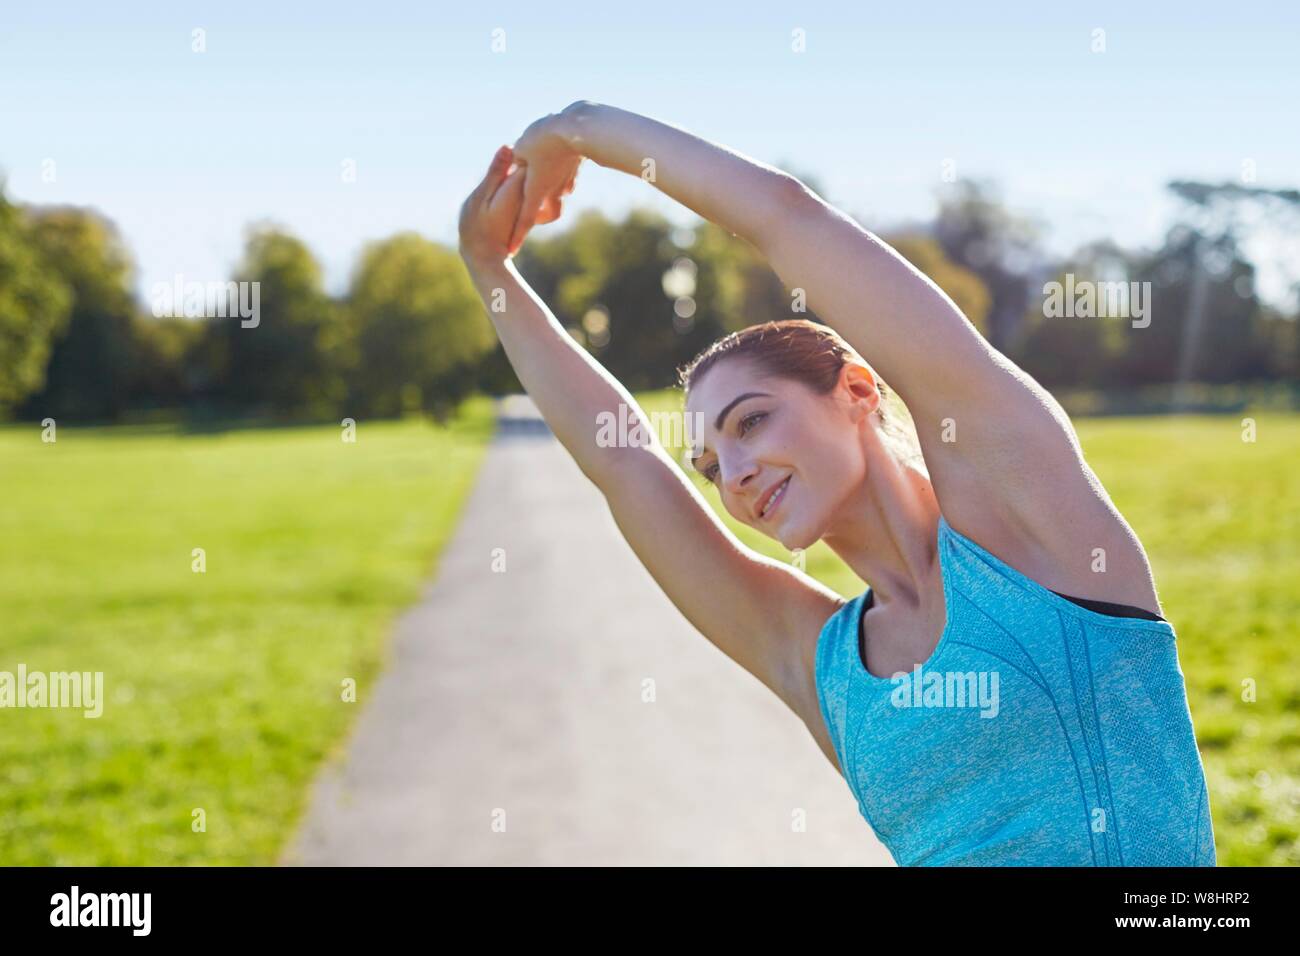 Young woman stretching. Stock Photo